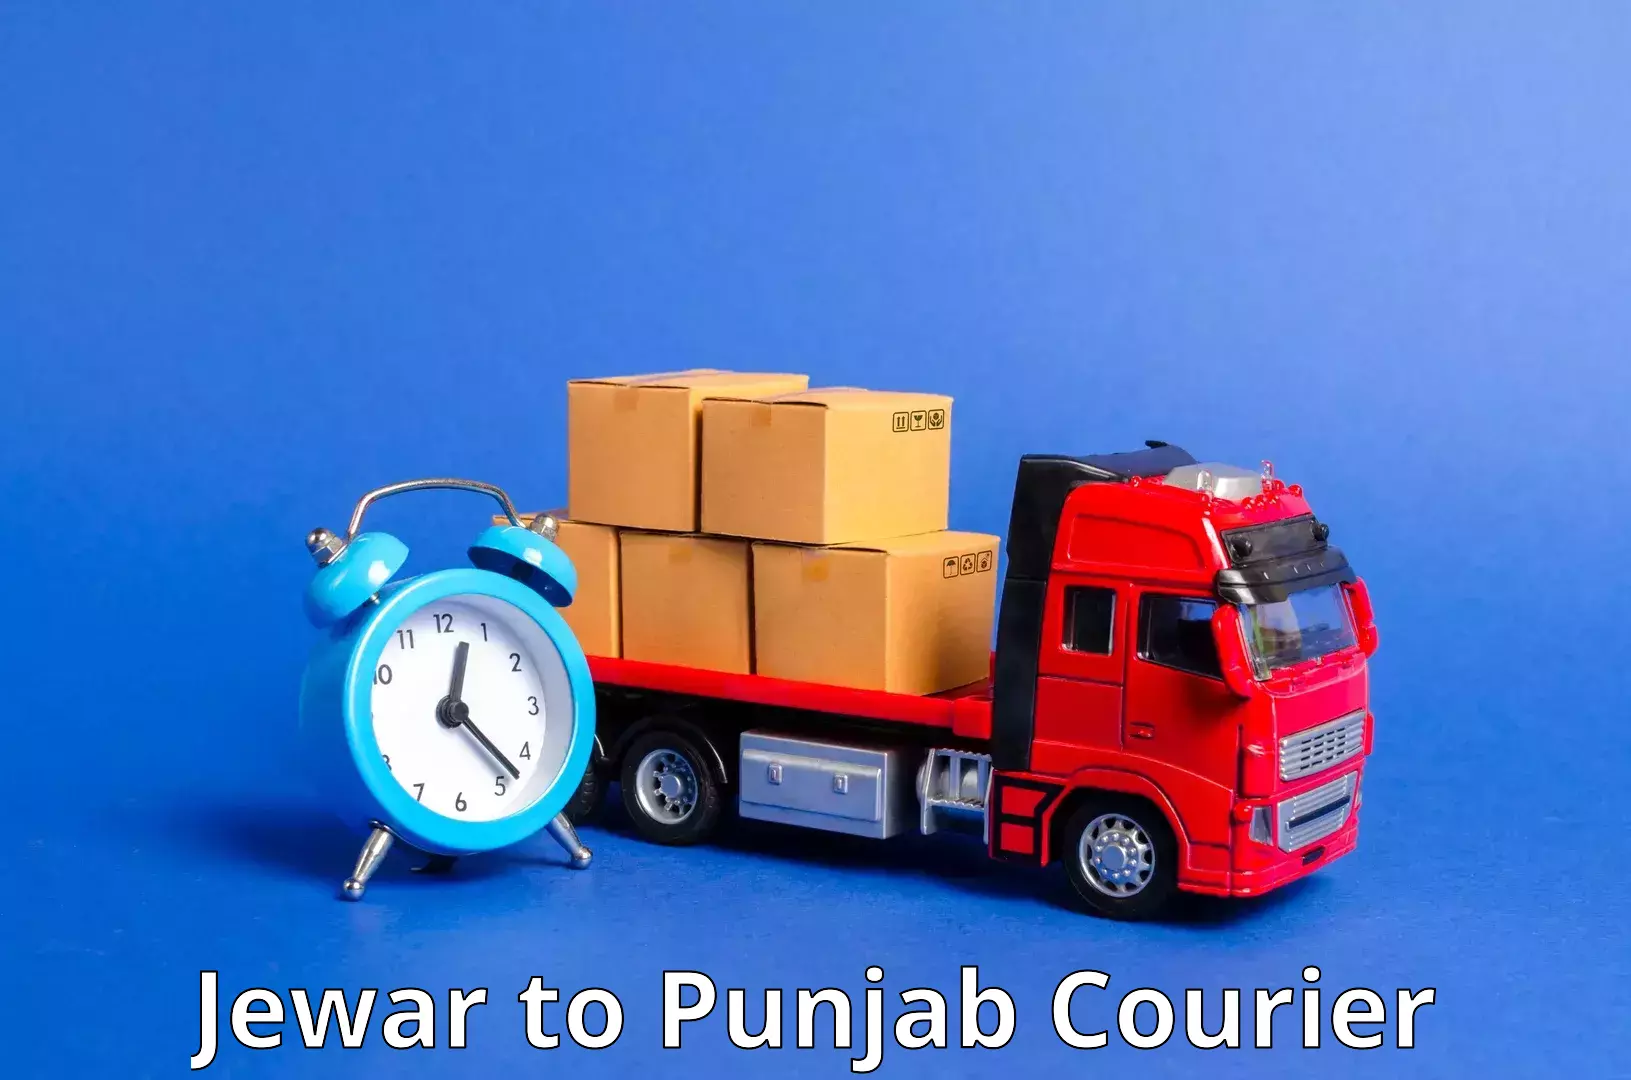 Multi-service courier options Jewar to Begowal